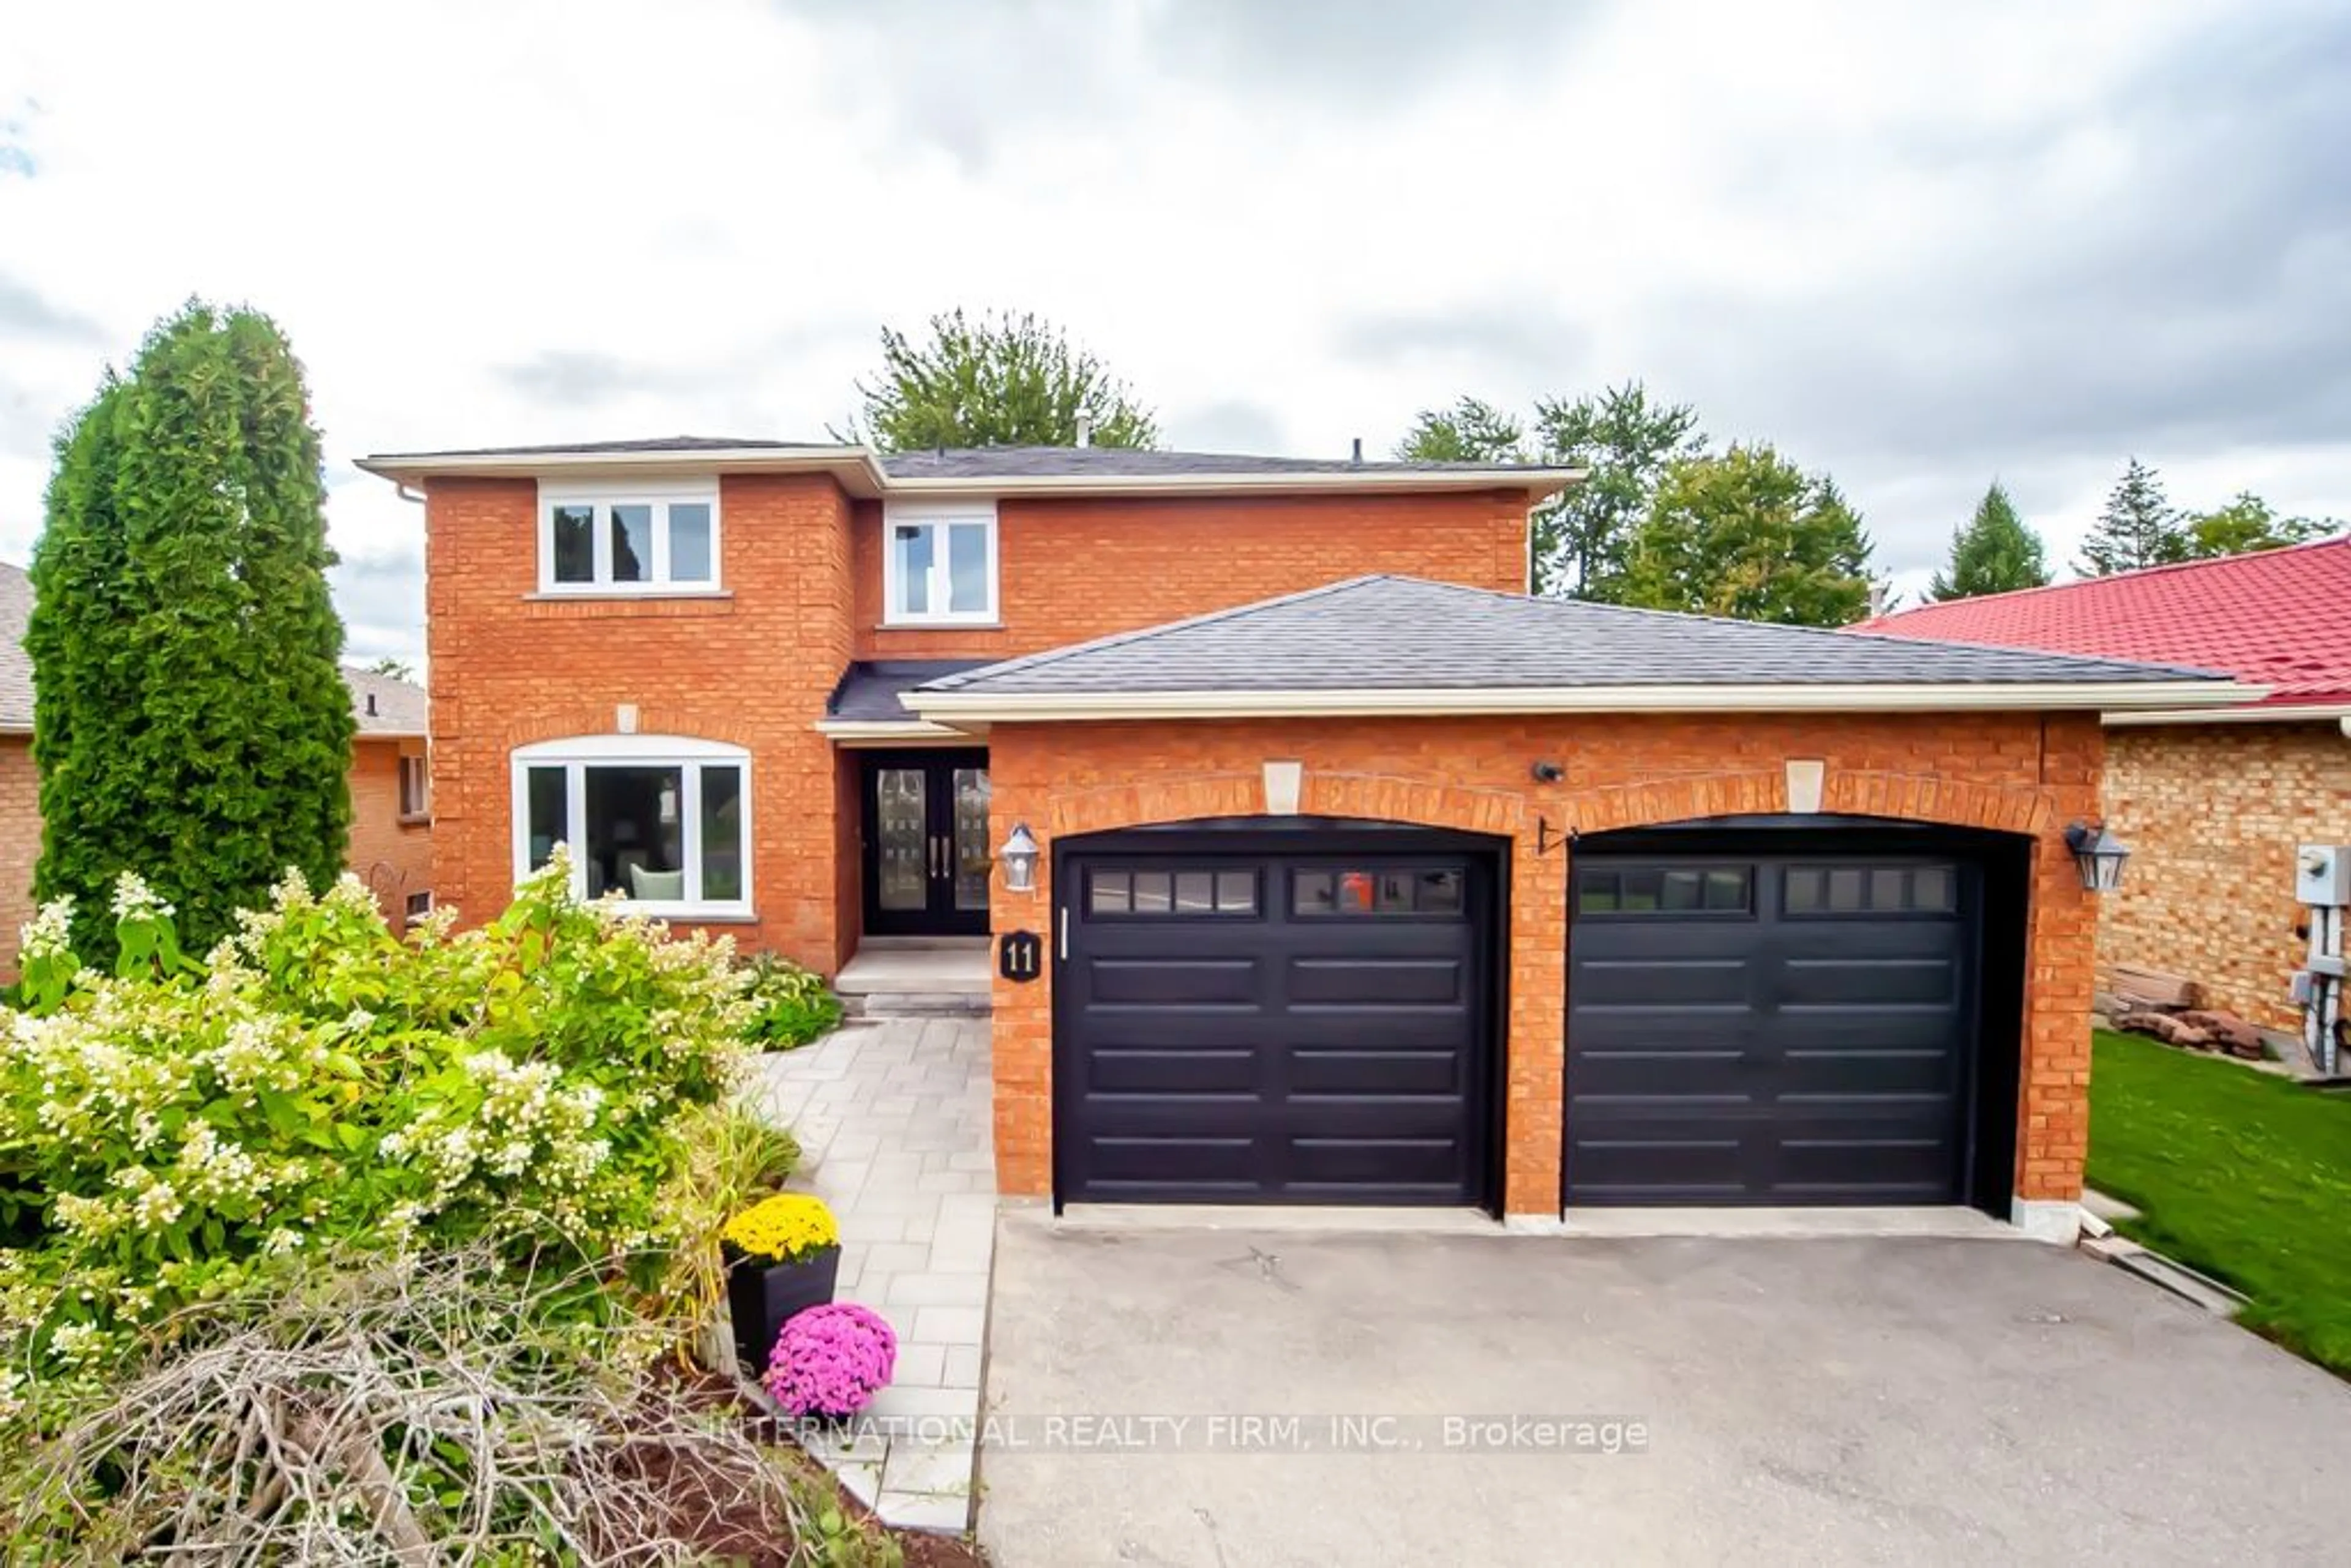 Home with brick exterior material for 11 Coates Cres, Richmond Hill Ontario L4E 2M3